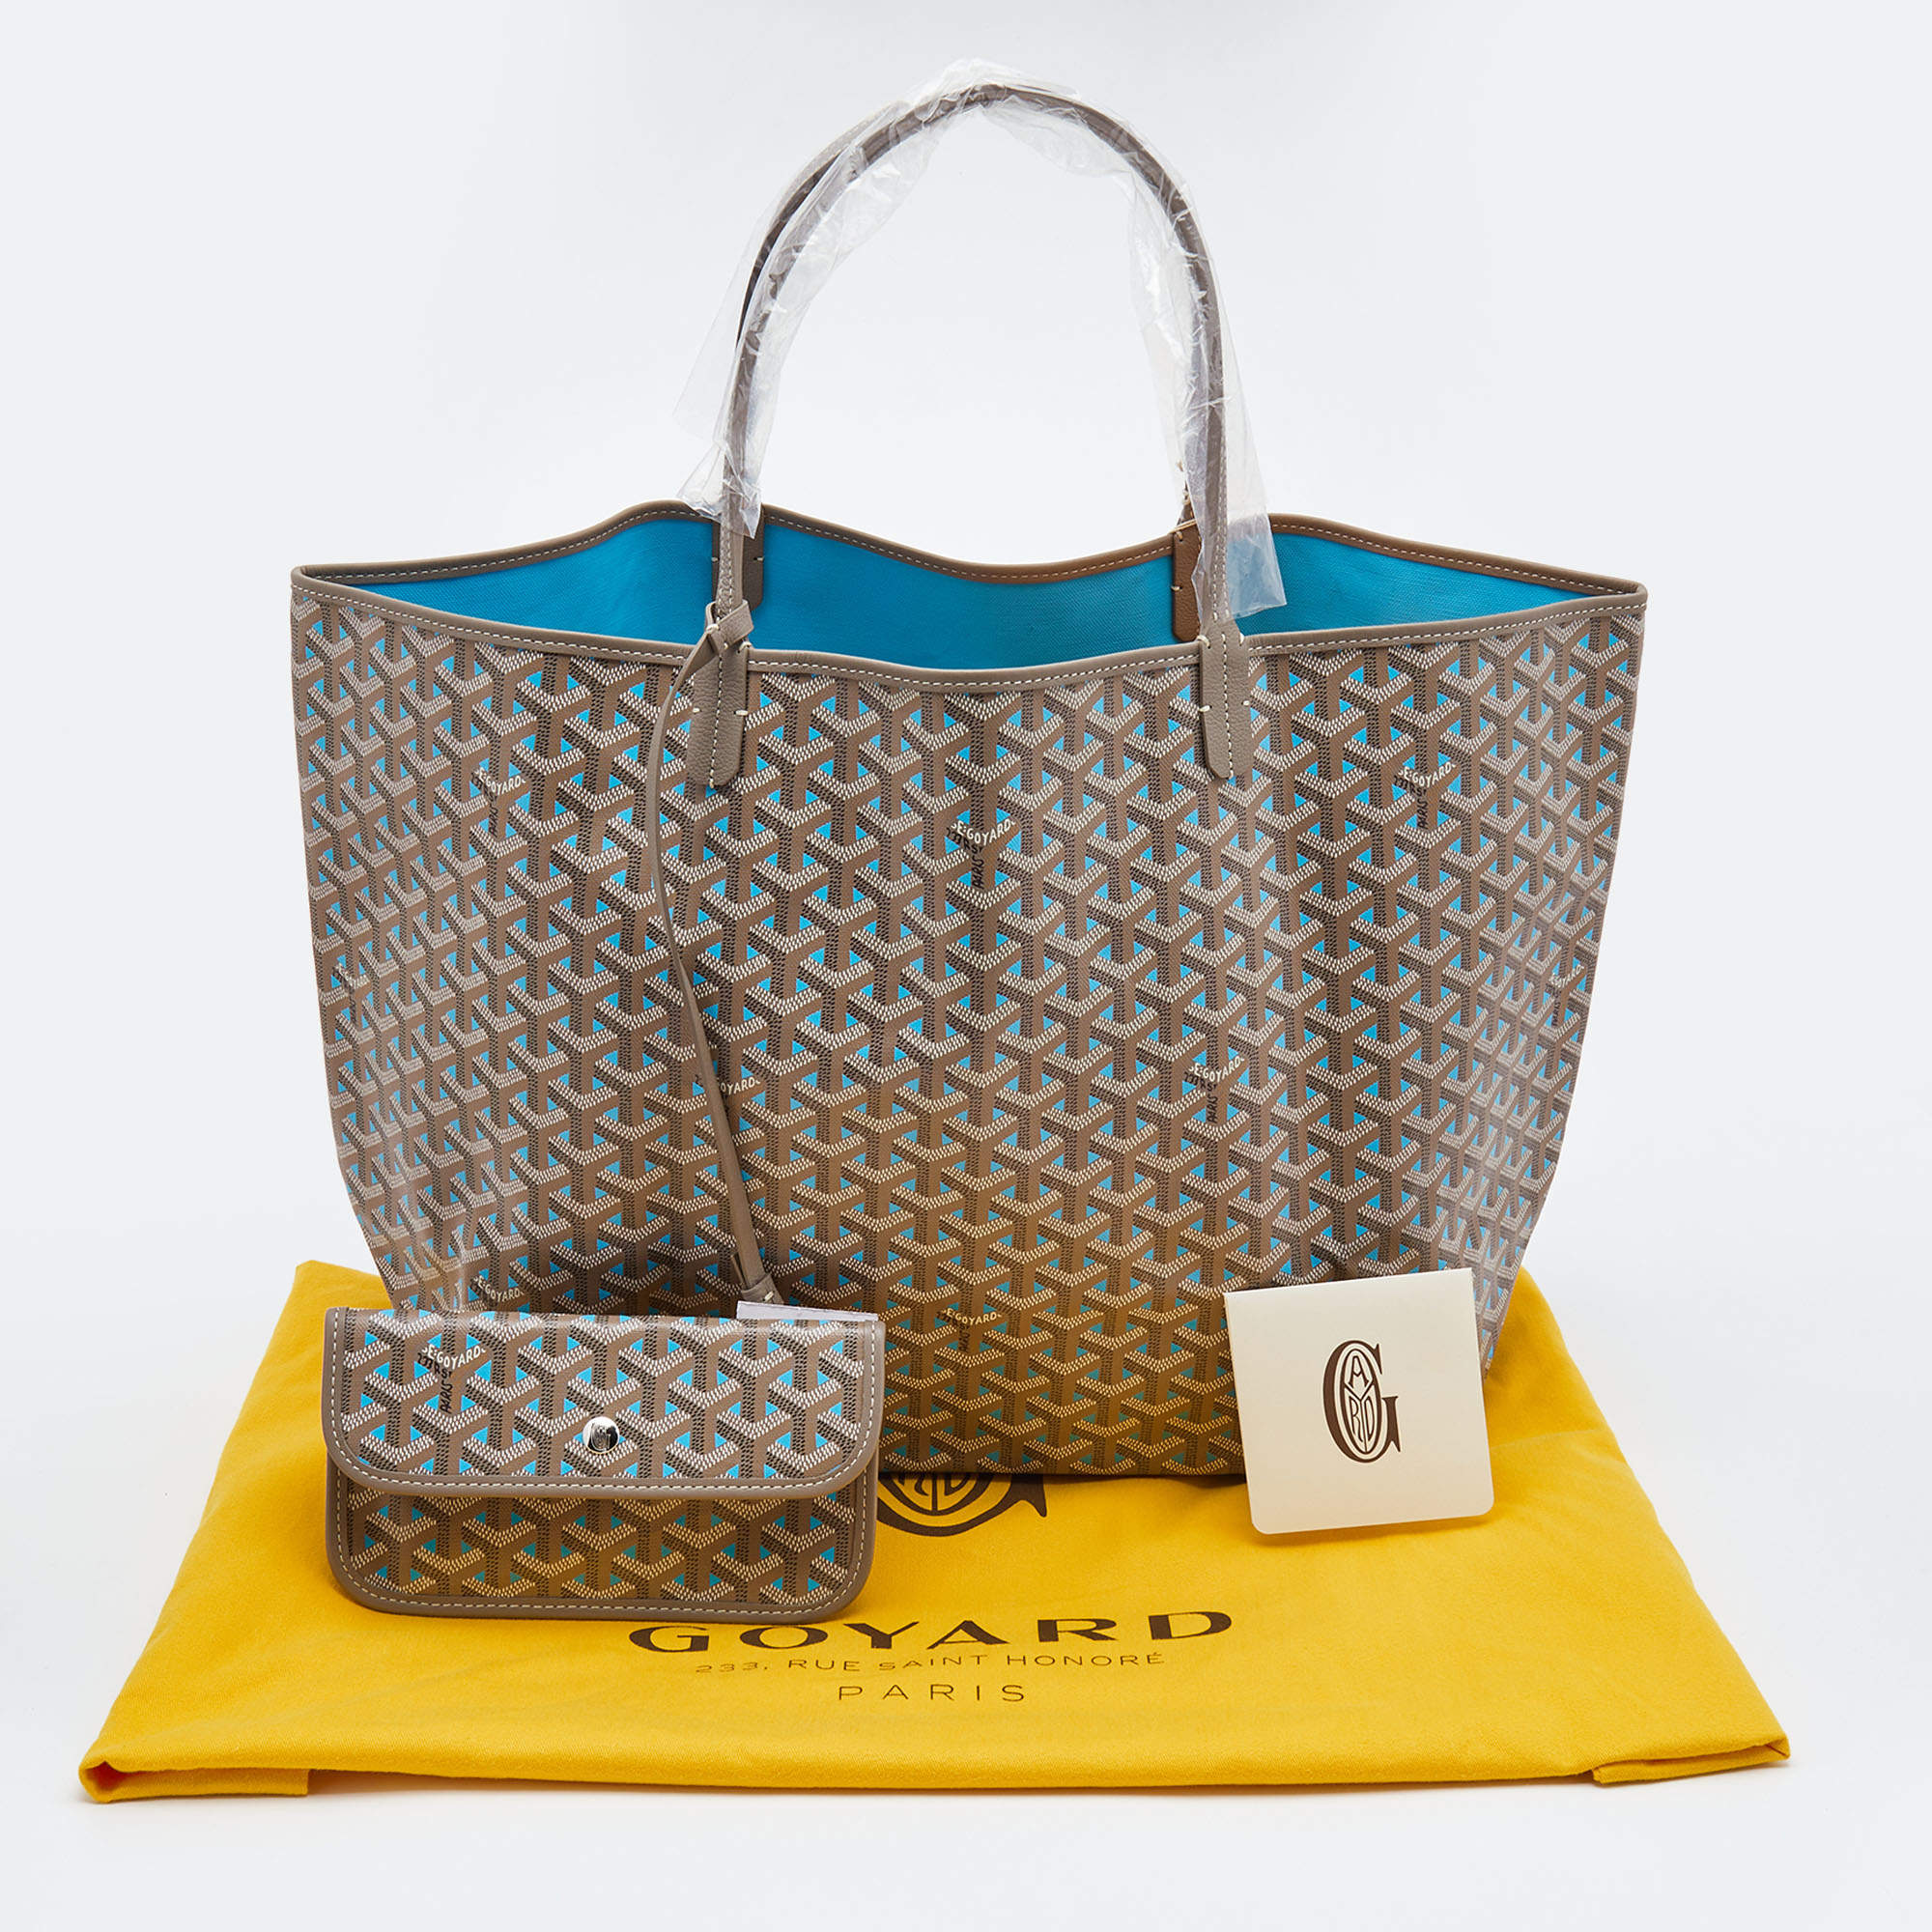 Goyard, Bags, Brand New Goyard Hardy Tote Pm Bag With Dustbag And Tag